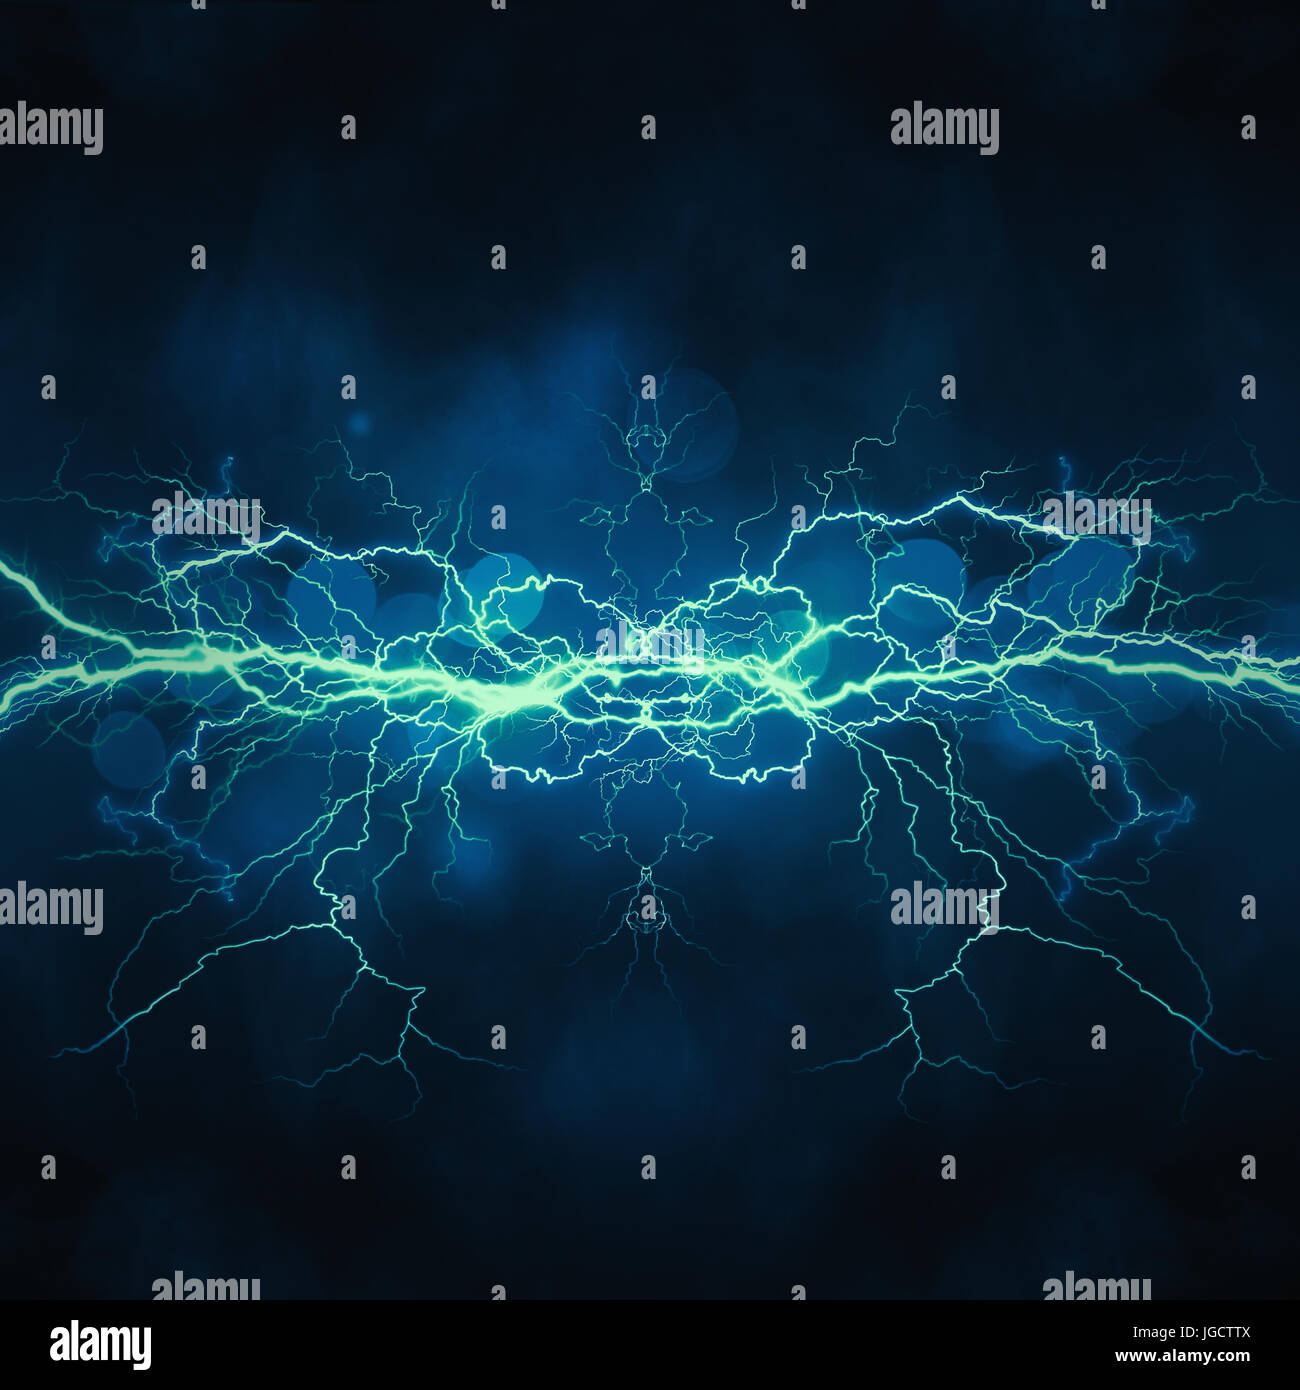 Thunder bolt, industrial and science abstract backgrounds Stock Photo